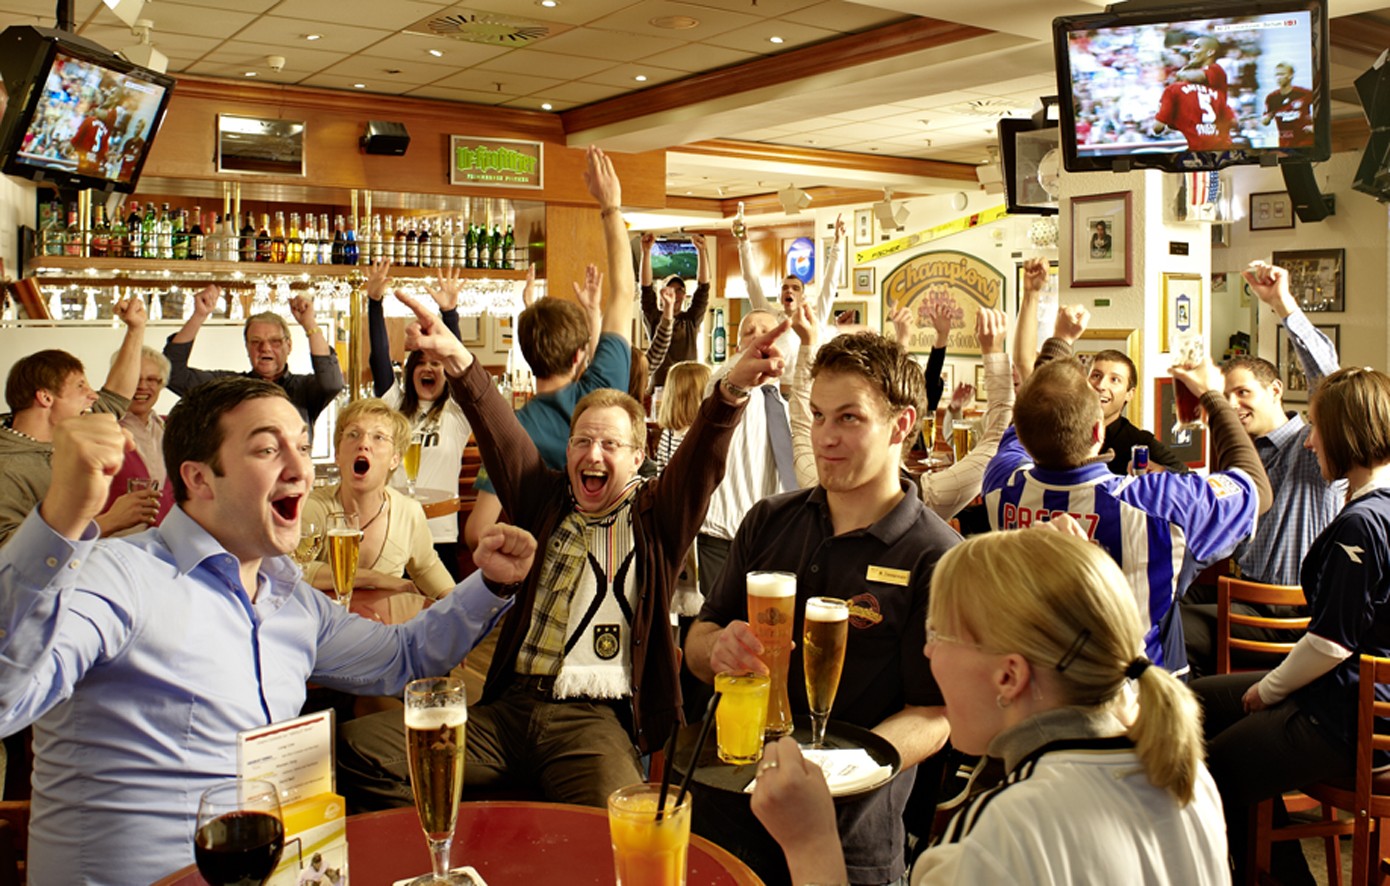 Good food, good times, good sports - in der Champions - The American Sports Bar.